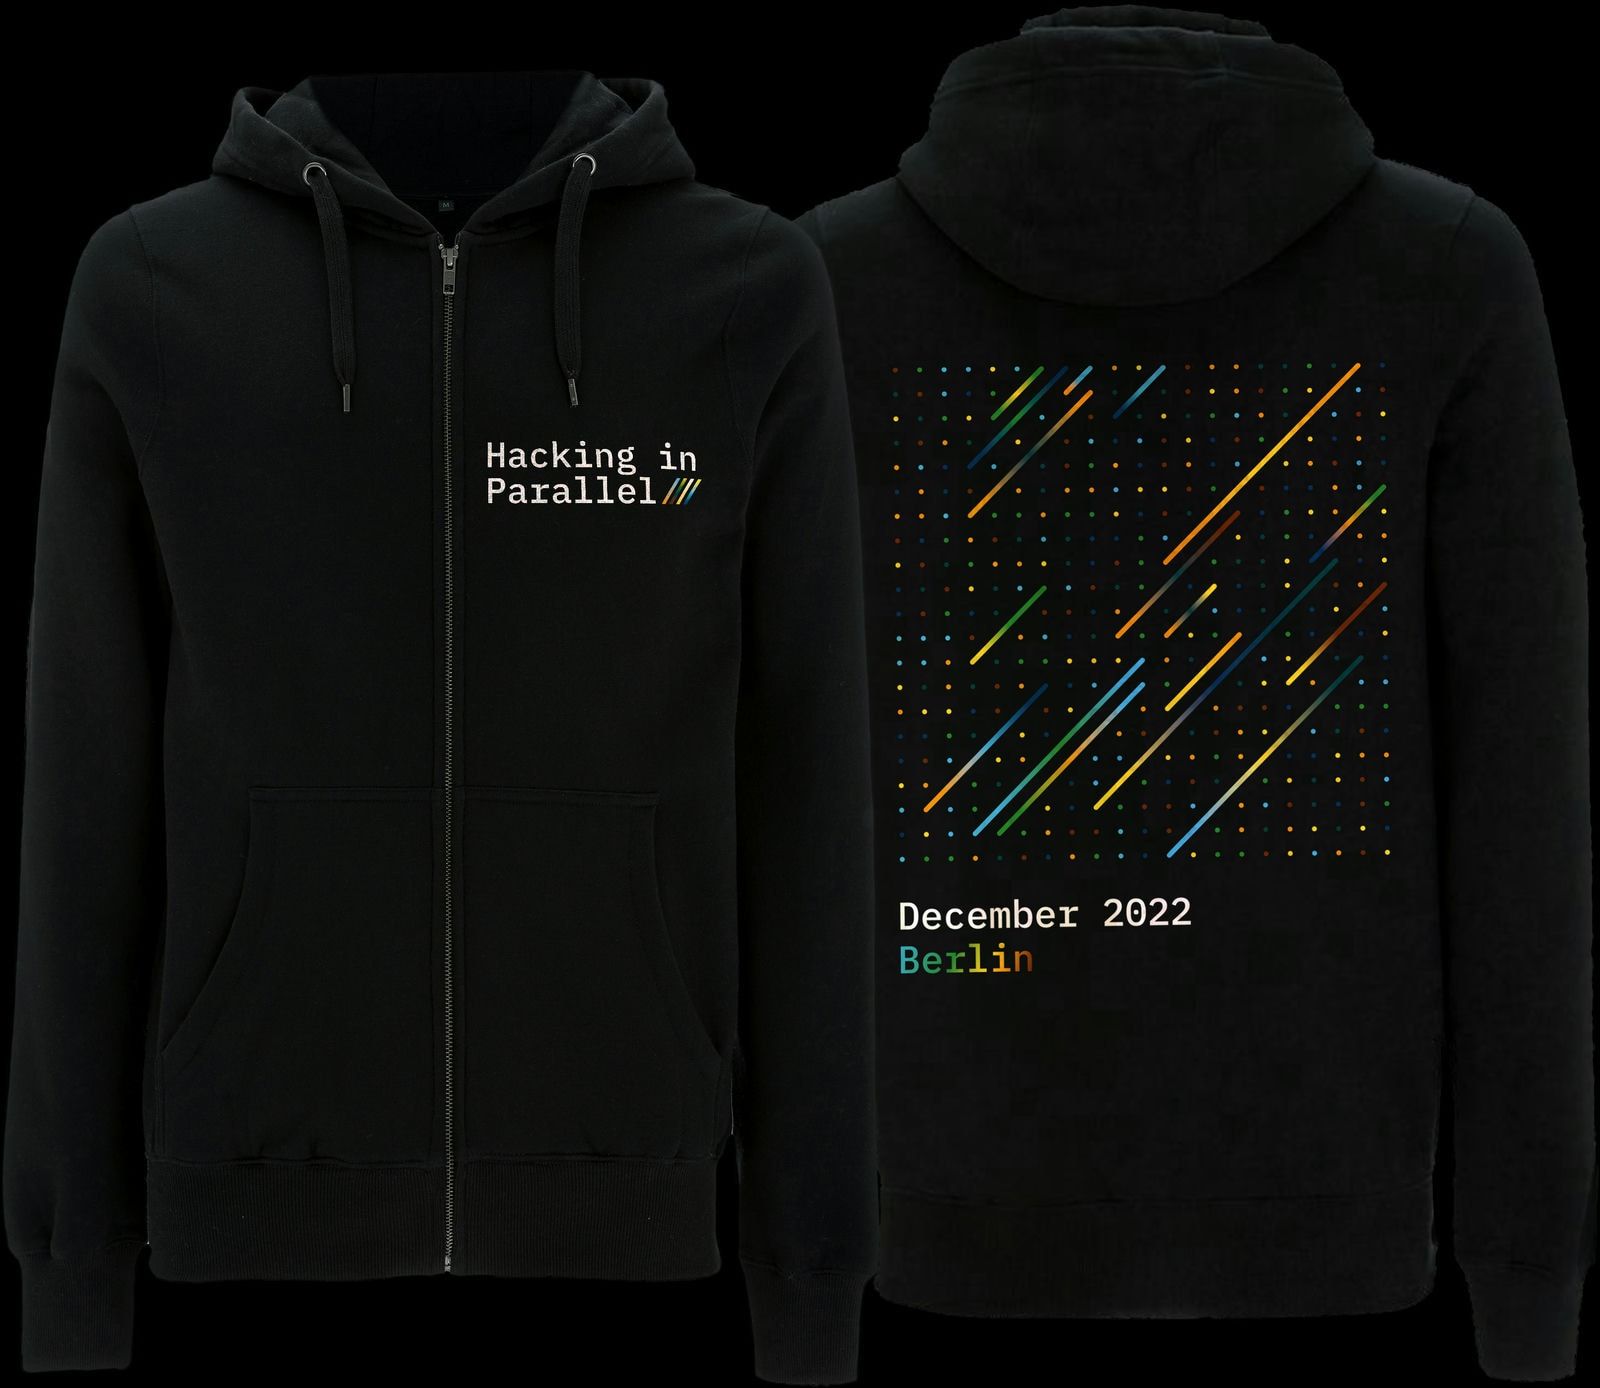 Hacking in Parallel Berlin 2022 Zip Up Hoodie with a colorful print of a geometric grid with several gradient lines going from bottom left to top right